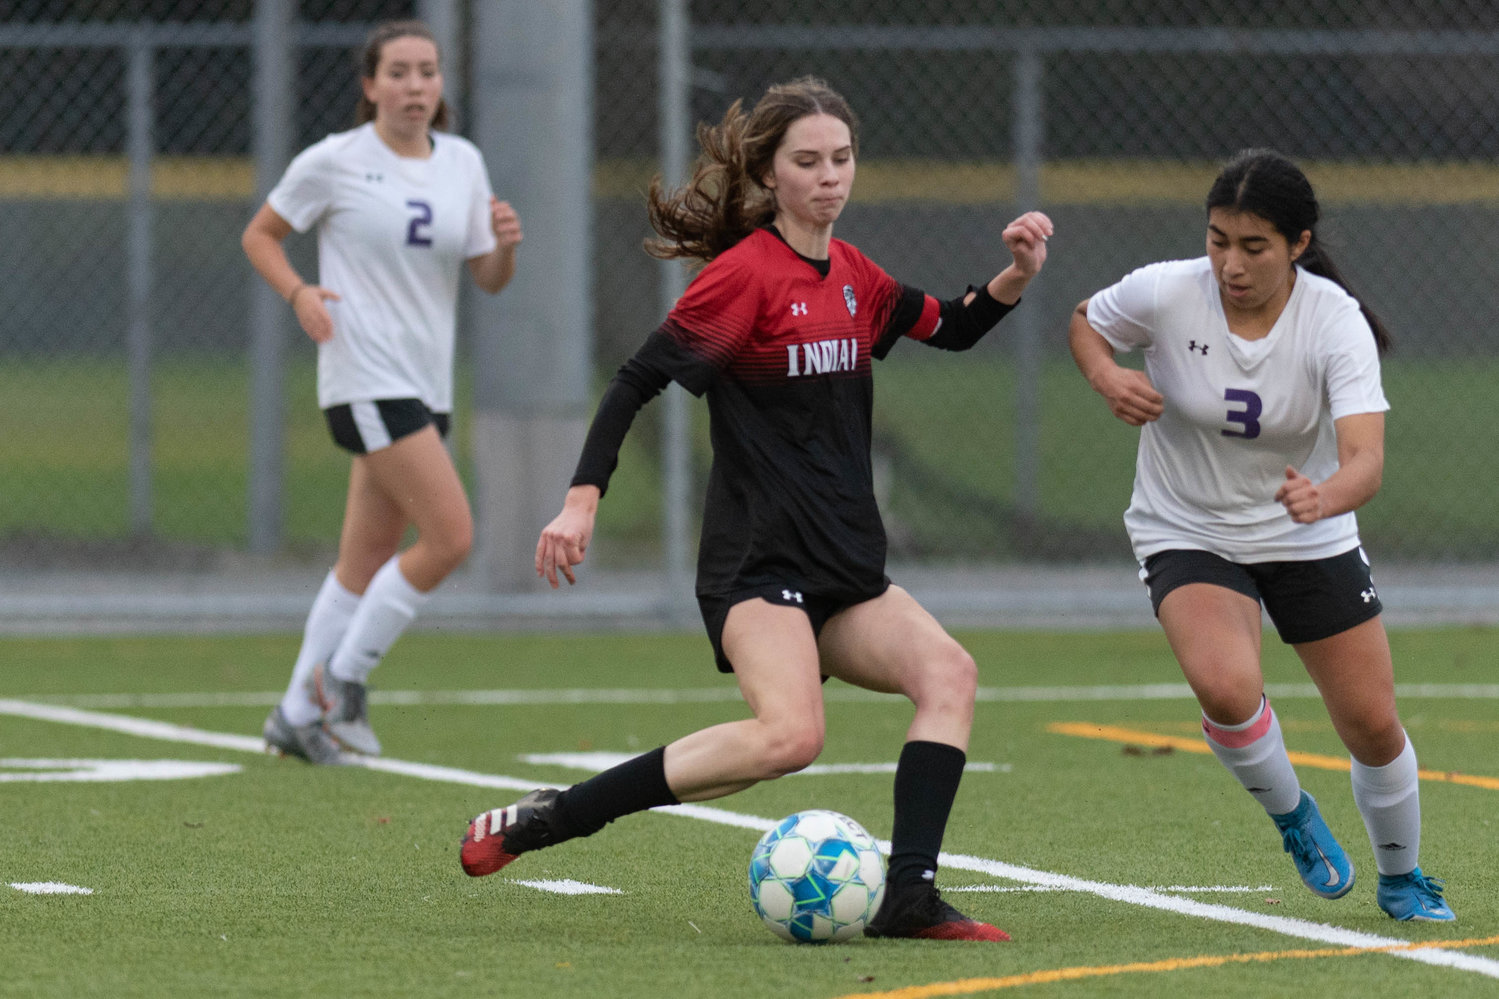 FILE PHOTO -- Toledo's Marina Smith sends a shot toward the goal against Friday Harbor in the opening round of the WIAA 2B soccer tournament Nov. 10 in Black Hills.